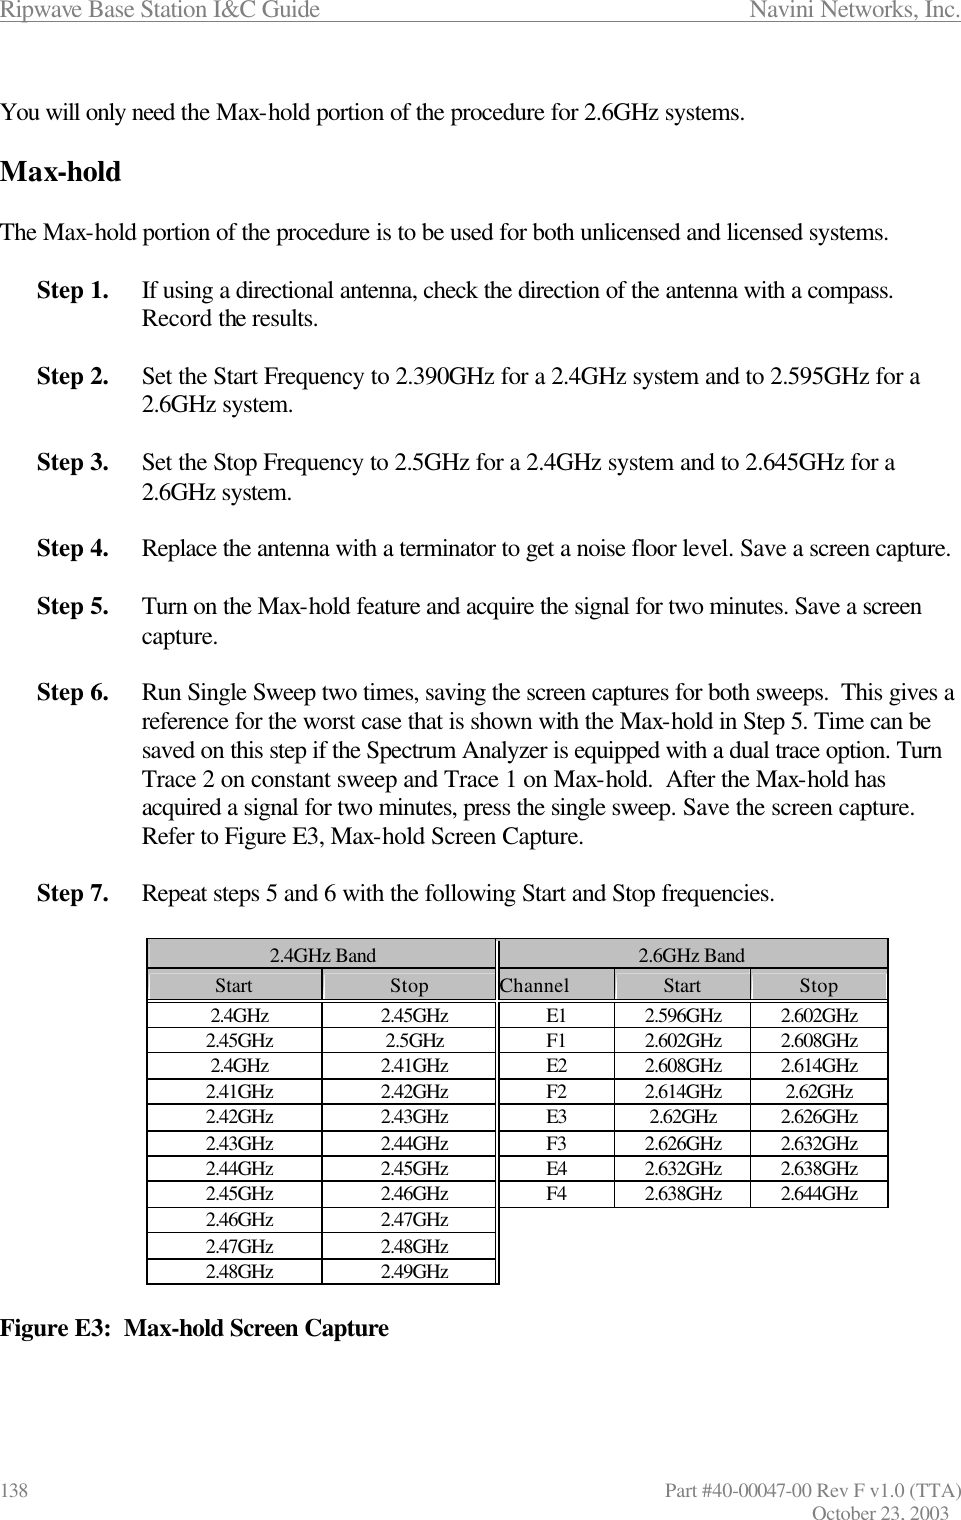 Ripwave Base Station I&amp;C Guide                 Navini Networks, Inc. 138                      Part #40-00047-00 Rev F v1.0 (TTA) October 23, 2003  You will only need the Max-hold portion of the procedure for 2.6GHz systems.  Max-hold  The Max-hold portion of the procedure is to be used for both unlicensed and licensed systems.  Step 1. If using a directional antenna, check the direction of the antenna with a compass. Record the results.  Step 2. Set the Start Frequency to 2.390GHz for a 2.4GHz system and to 2.595GHz for a 2.6GHz system.   Step 3. Set the Stop Frequency to 2.5GHz for a 2.4GHz system and to 2.645GHz for a 2.6GHz system.  Step 4. Replace the antenna with a terminator to get a noise floor level. Save a screen capture.  Step 5. Turn on the Max-hold feature and acquire the signal for two minutes. Save a screen capture.  Step 6. Run Single Sweep two times, saving the screen captures for both sweeps.  This gives a reference for the worst case that is shown with the Max-hold in Step 5. Time can be saved on this step if the Spectrum Analyzer is equipped with a dual trace option. Turn Trace 2 on constant sweep and Trace 1 on Max-hold.  After the Max-hold has acquired a signal for two minutes, press the single sweep. Save the screen capture. Refer to Figure E3, Max-hold Screen Capture.  Step 7. Repeat steps 5 and 6 with the following Start and Stop frequencies.  2.4GHz Band 2.6GHz Band Start Stop Channel Start Stop   2.4GHz   2.45GHz E1 2.596GHz 2.602GHz   2.45GHz   2.5GHz F1 2.602GHz 2.608GHz   2.4GHz   2.41GHz E2 2.608GHz 2.614GHz   2.41GHz   2.42GHz F2 2.614GHz 2.62GHz   2.42GHz   2.43GHz E3 2.62GHz 2.626GHz   2.43GHz   2.44GHz F3 2.626GHz 2.632GHz   2.44GHz   2.45GHz E4 2.632GHz 2.638GHz   2.45GHz   2.46GHz F4 2.638GHz 2.644GHz   2.46GHz   2.47GHz         2.47GHz   2.48GHz         2.48GHz   2.49GHz        Figure E3:  Max-hold Screen Capture  